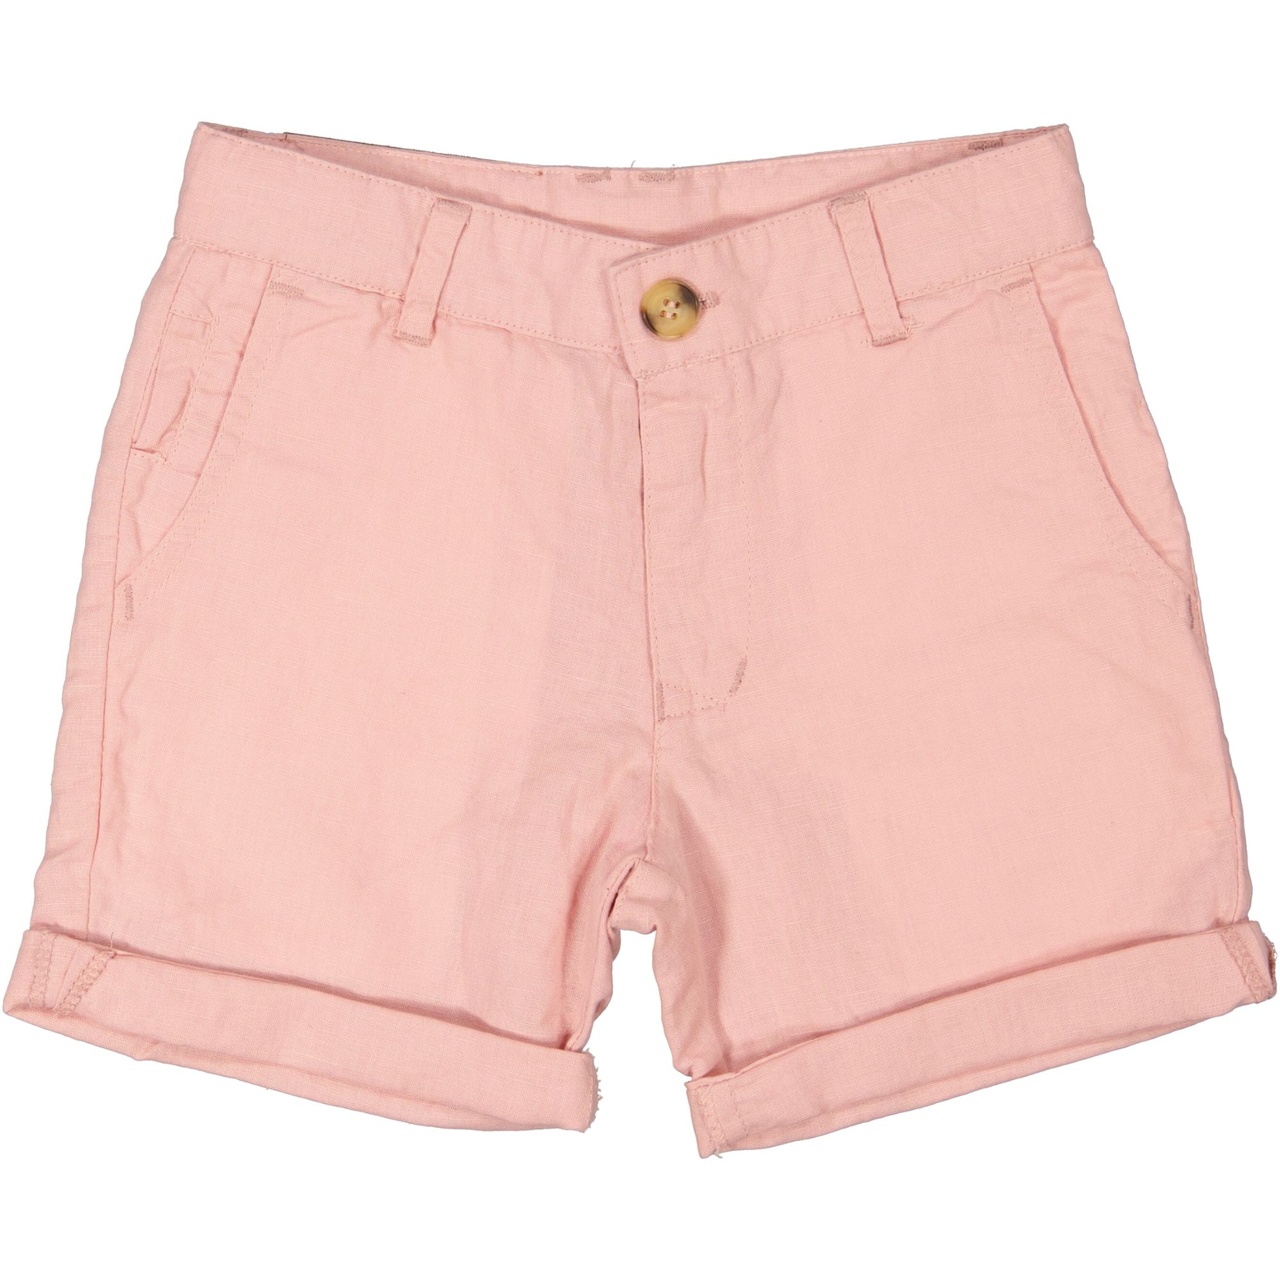 Linnen shorts Old pink 86/92